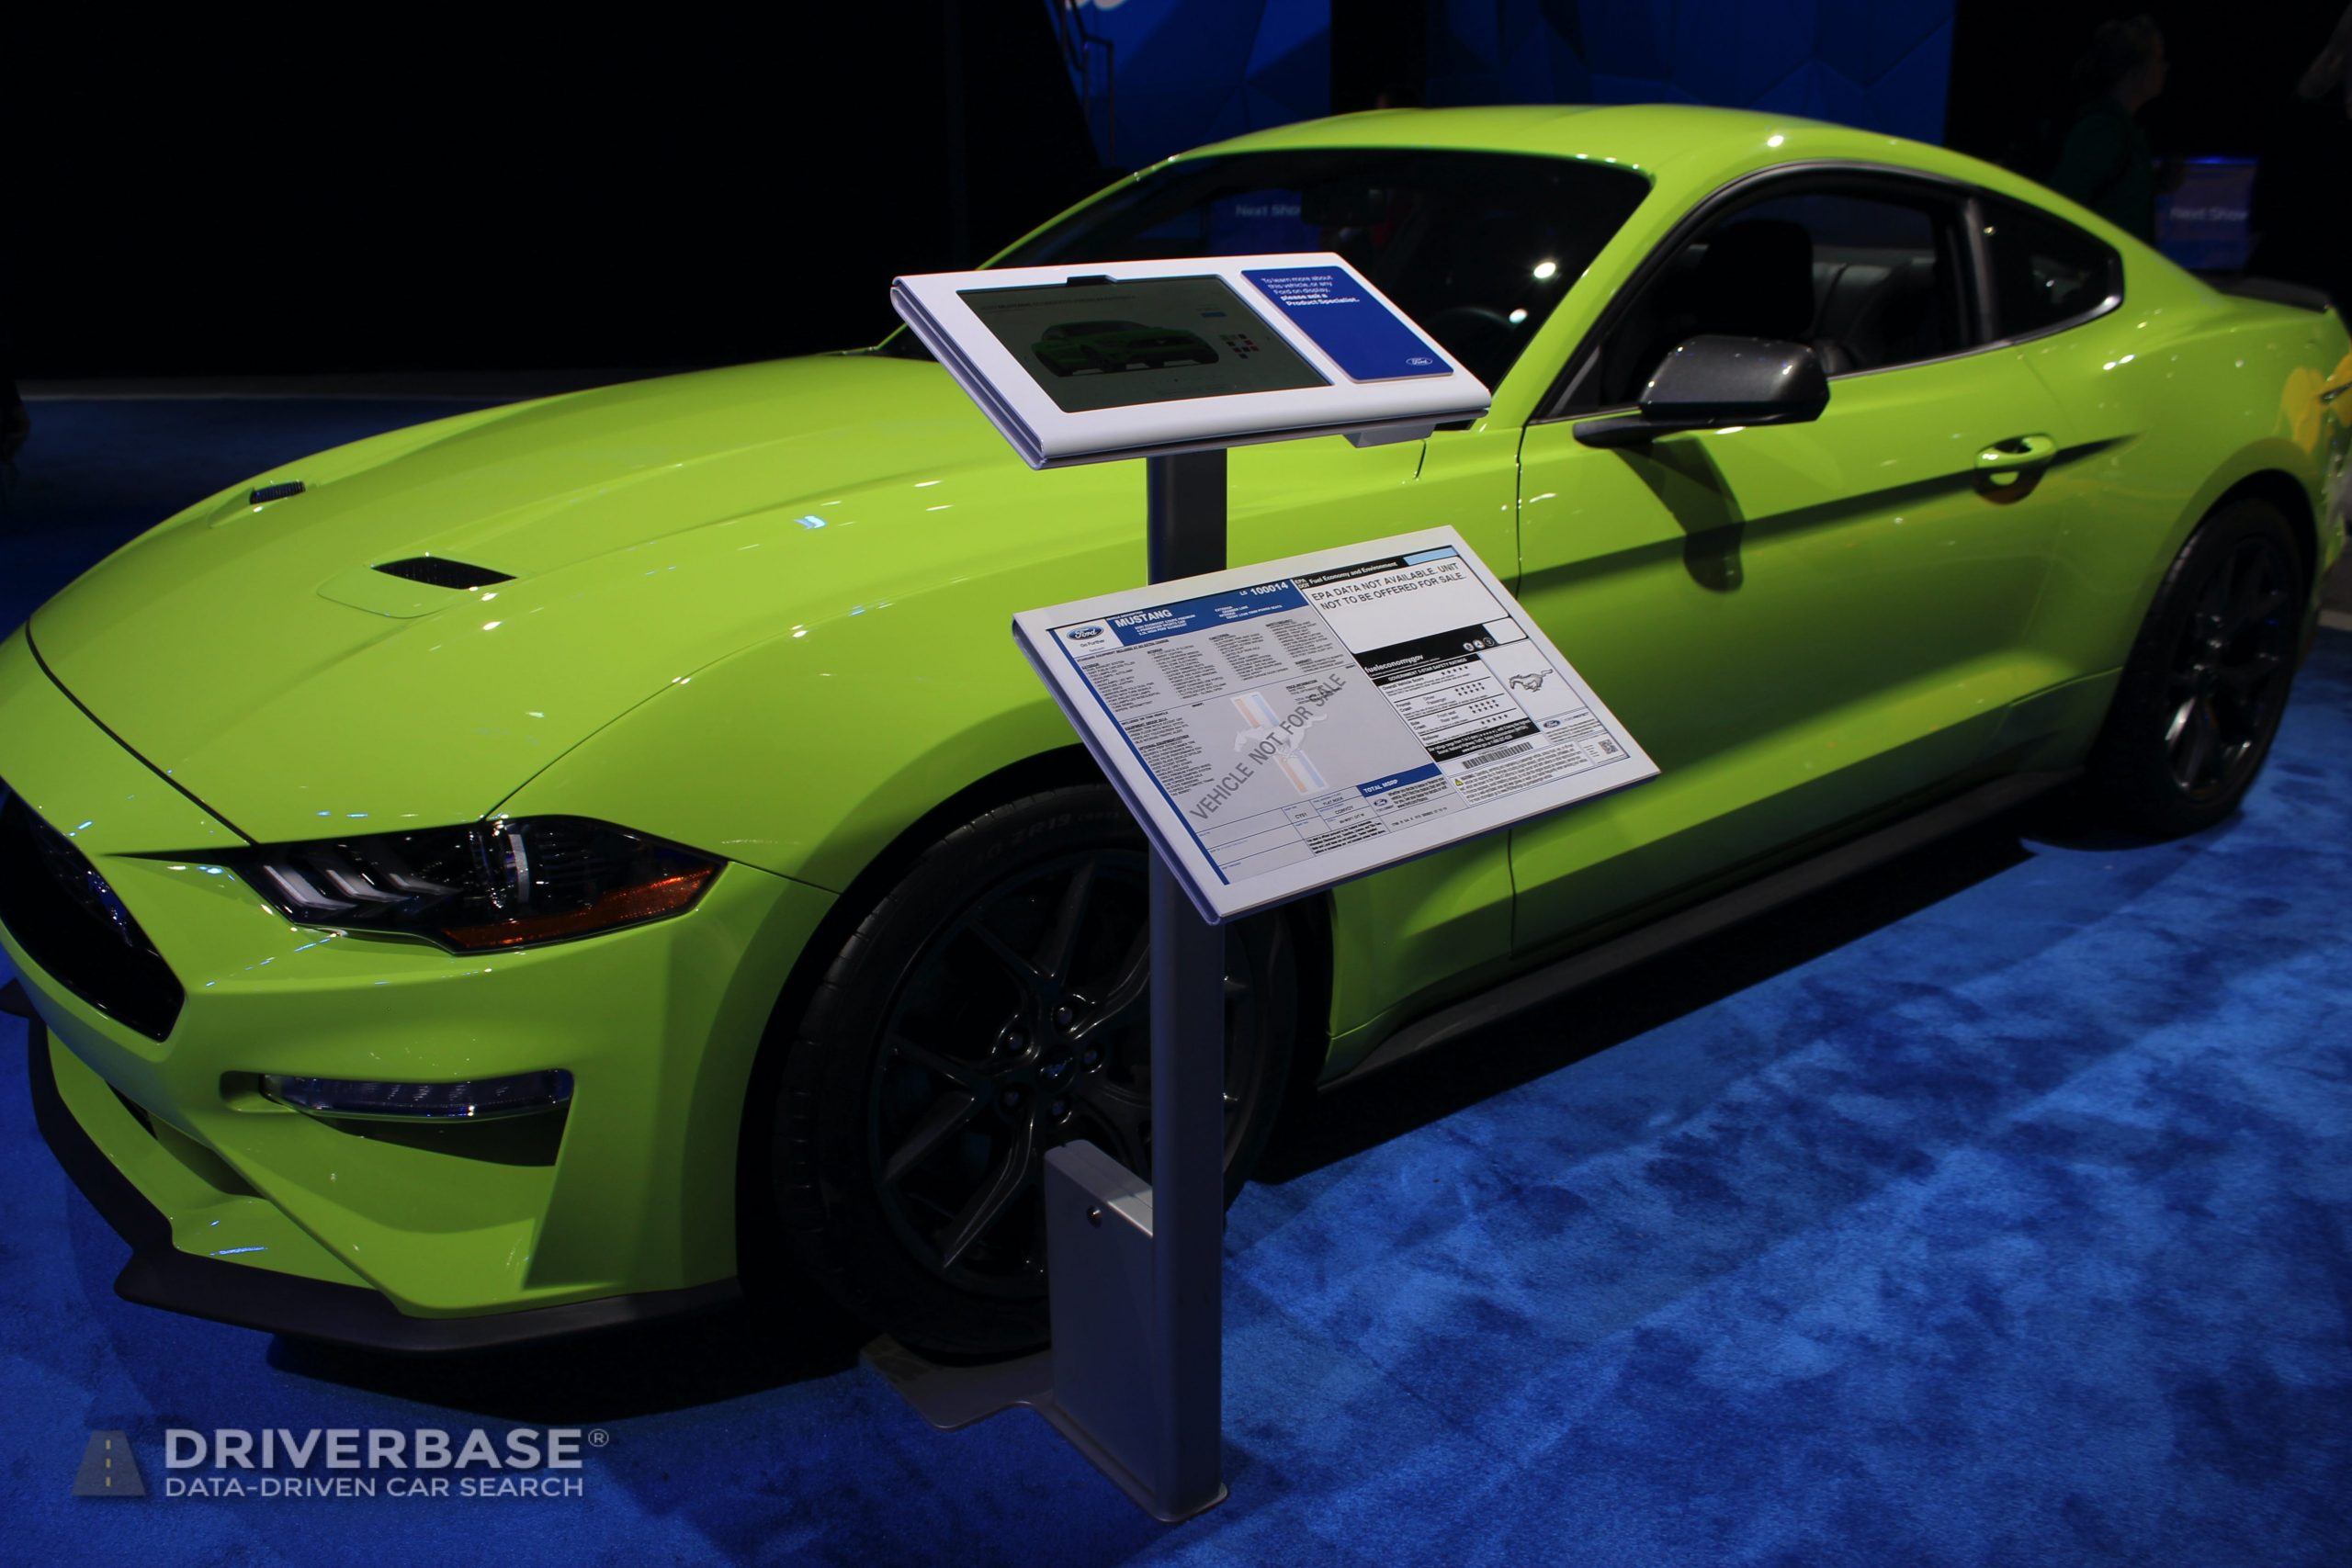 2020 Ford Mustang at the 2019 Los Angeles Auto Show